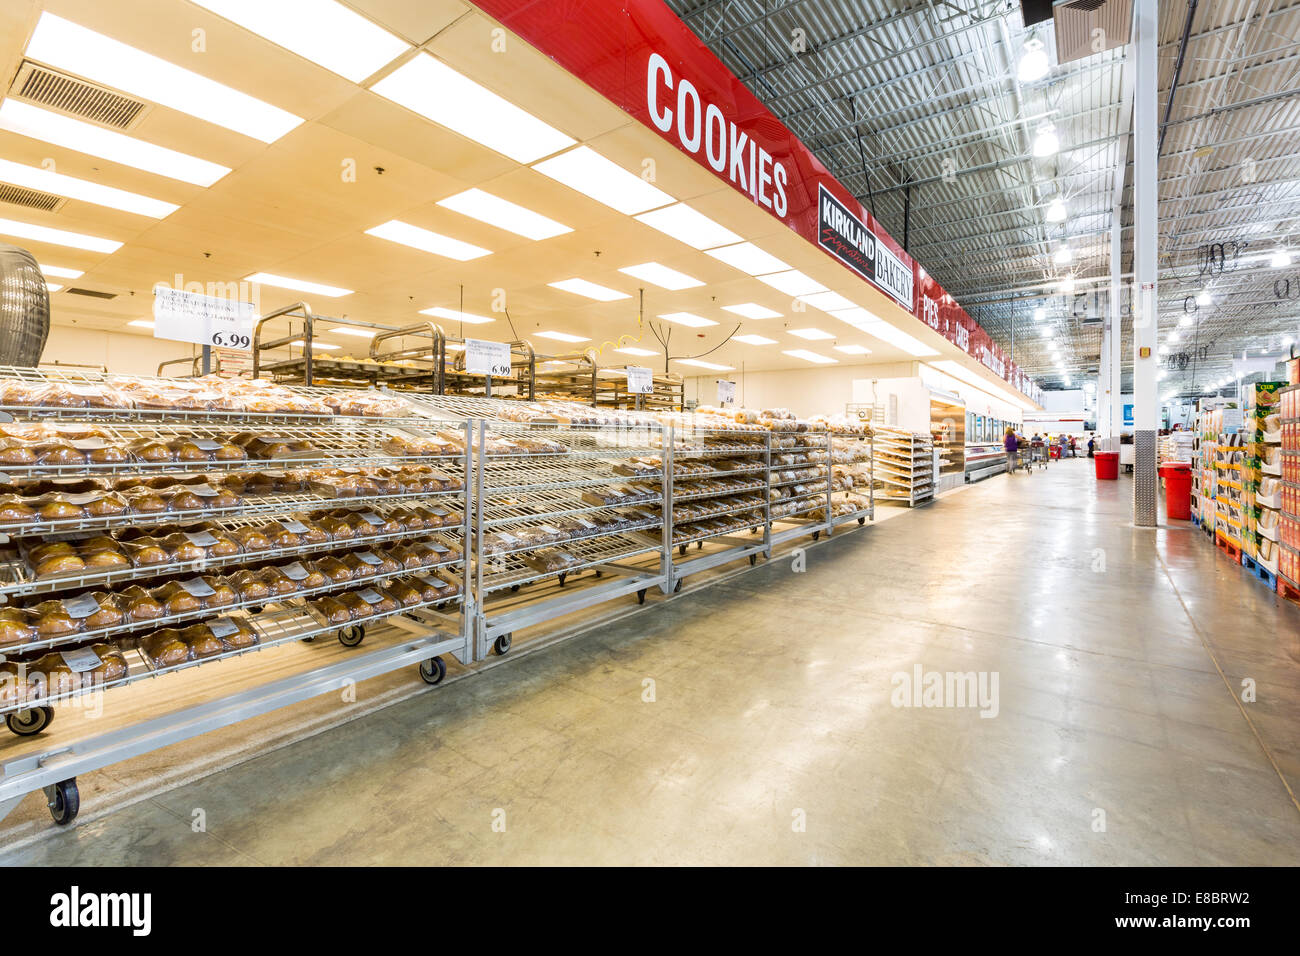 Bakery aisle in a Costco store Stock Photo